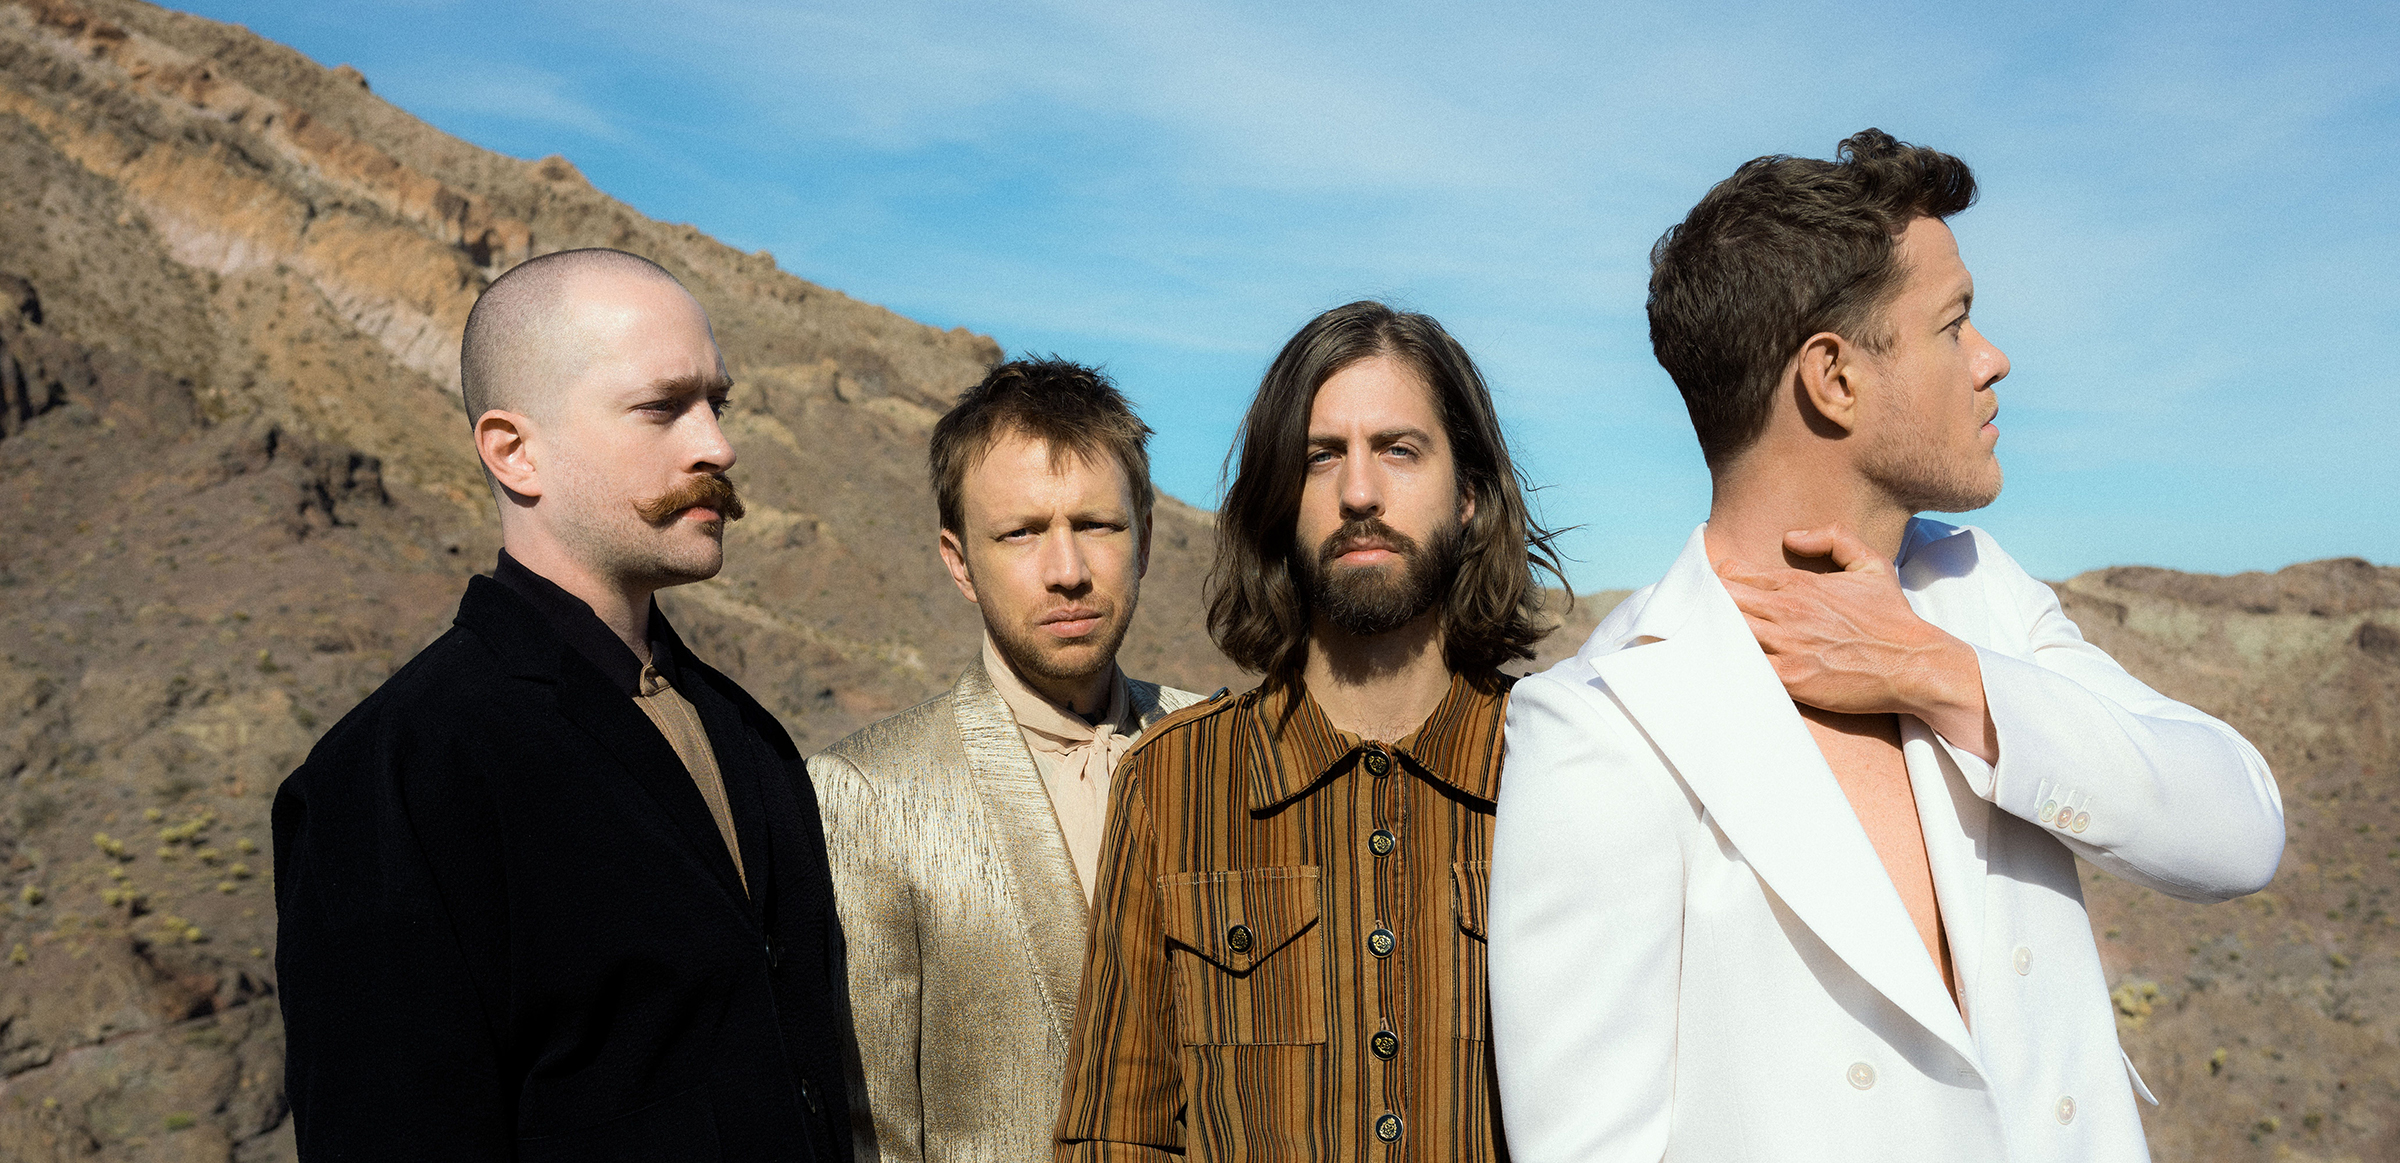 IMAGINE DRAGONS announce fifth studio album MERCURY - ACT 1 out 3rd September 1